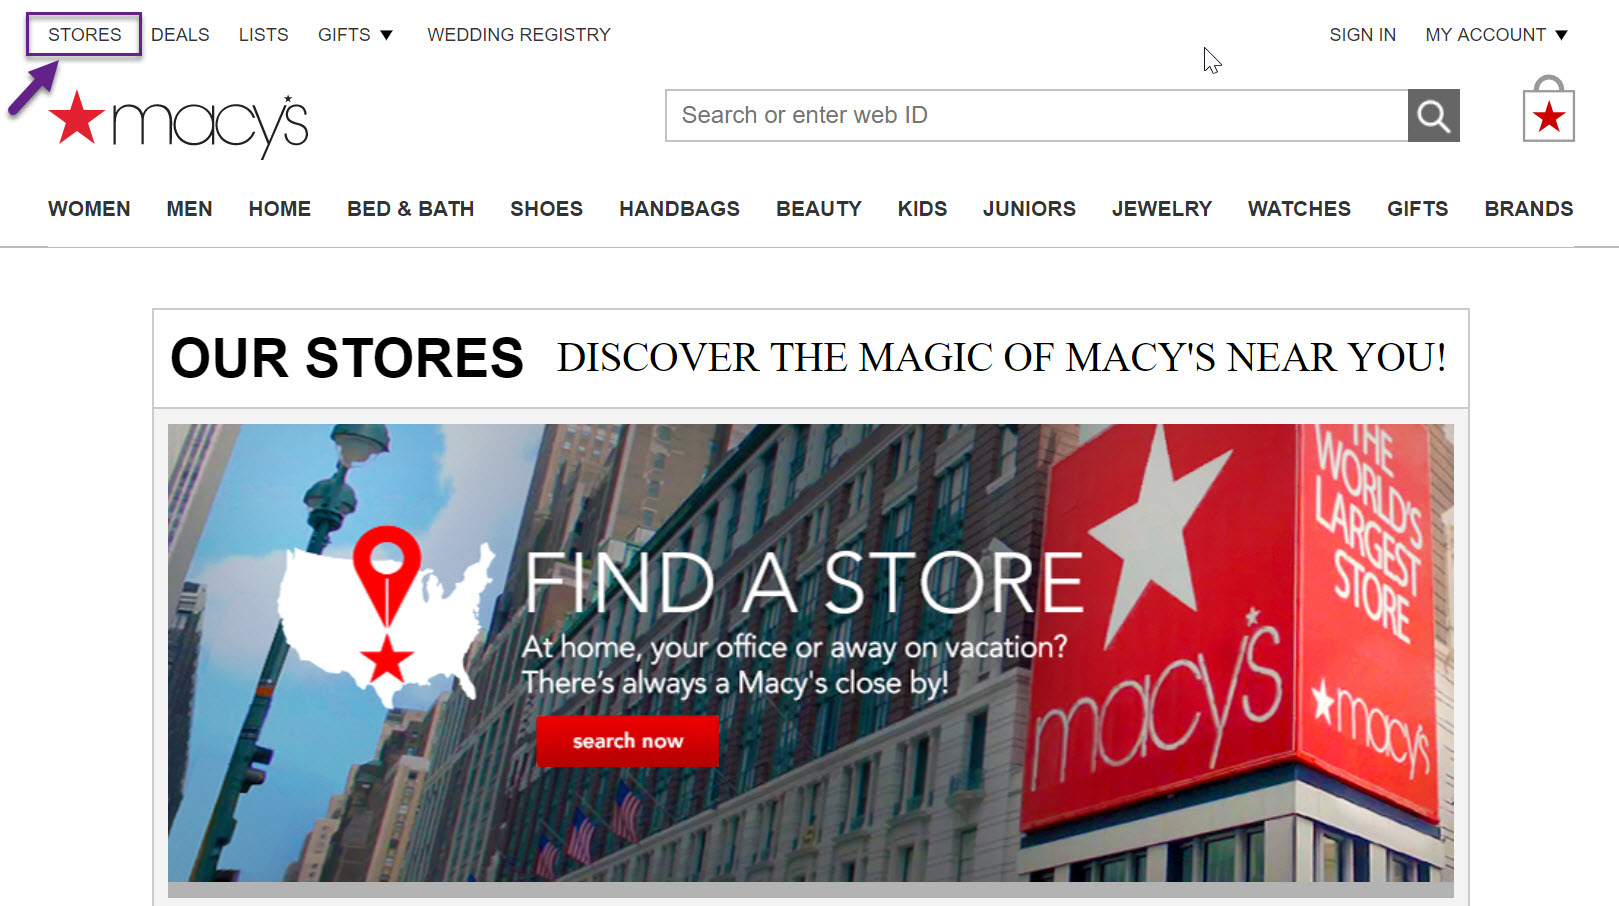 After clicking “Stores” in the upper left corner, visitors to Macys.com land on a marketing page where they need to click “Search Now” to get to the store locator.